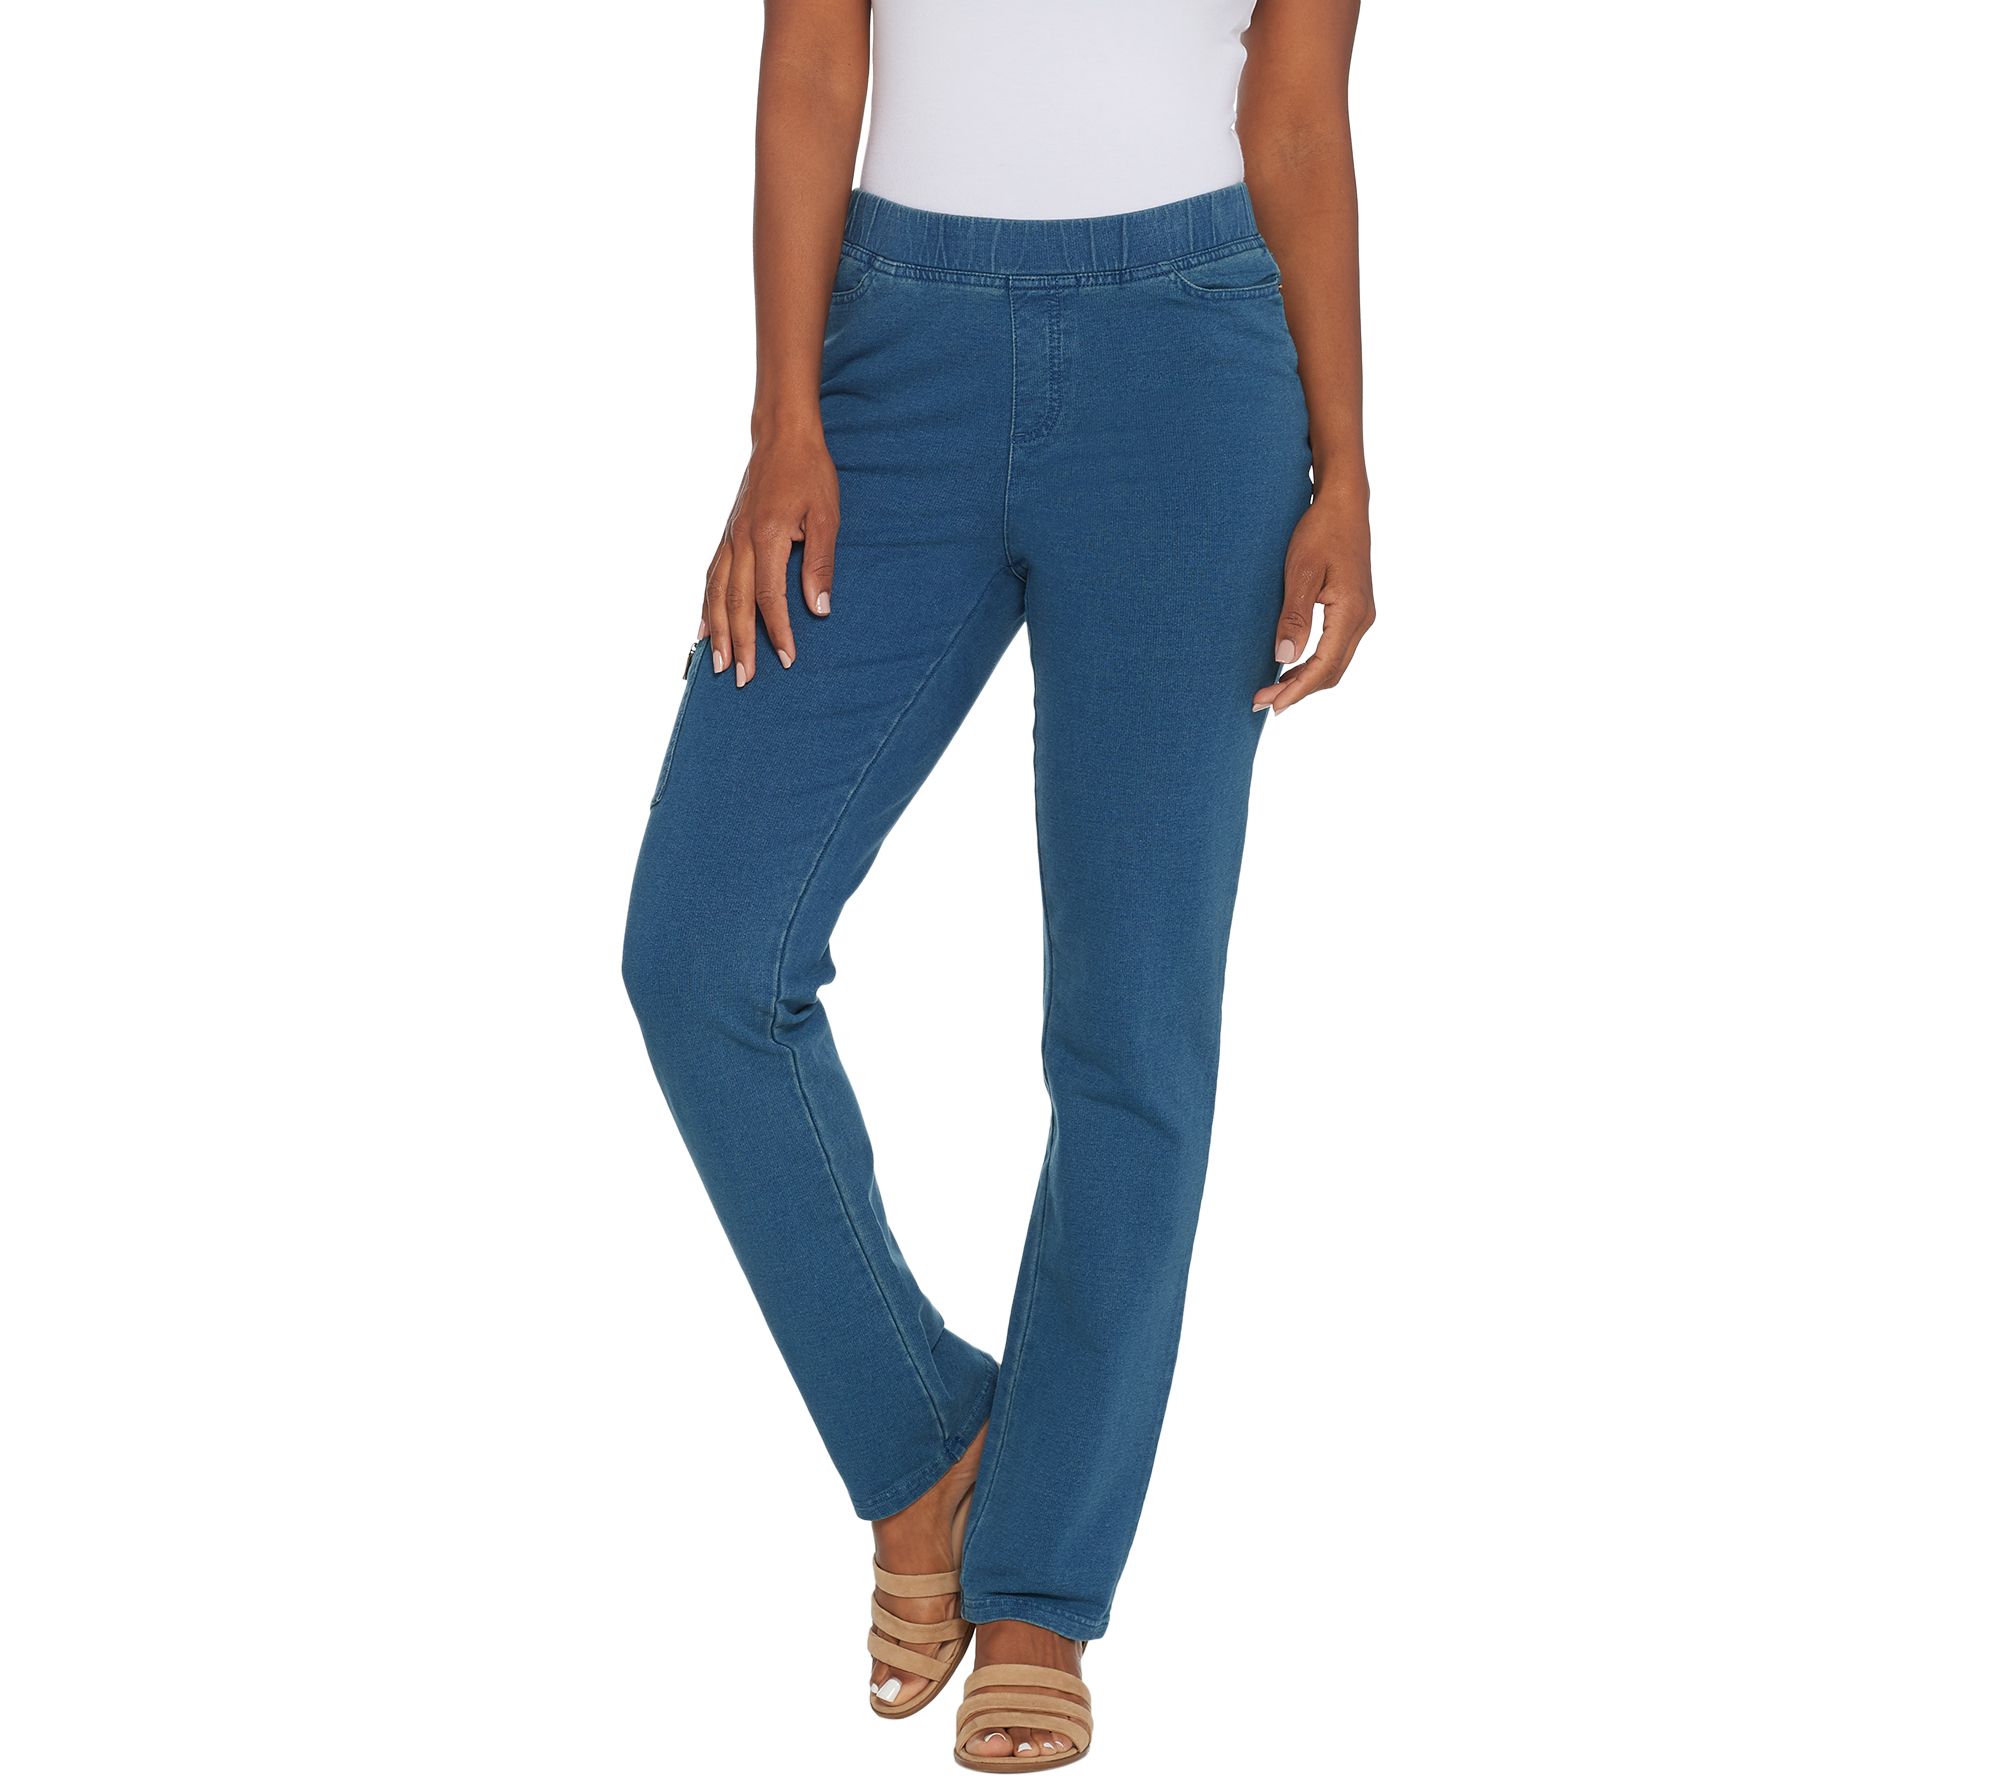 RealSize Women's Pocket Stretch Pull On Bootcut Jeans,, 52% OFF